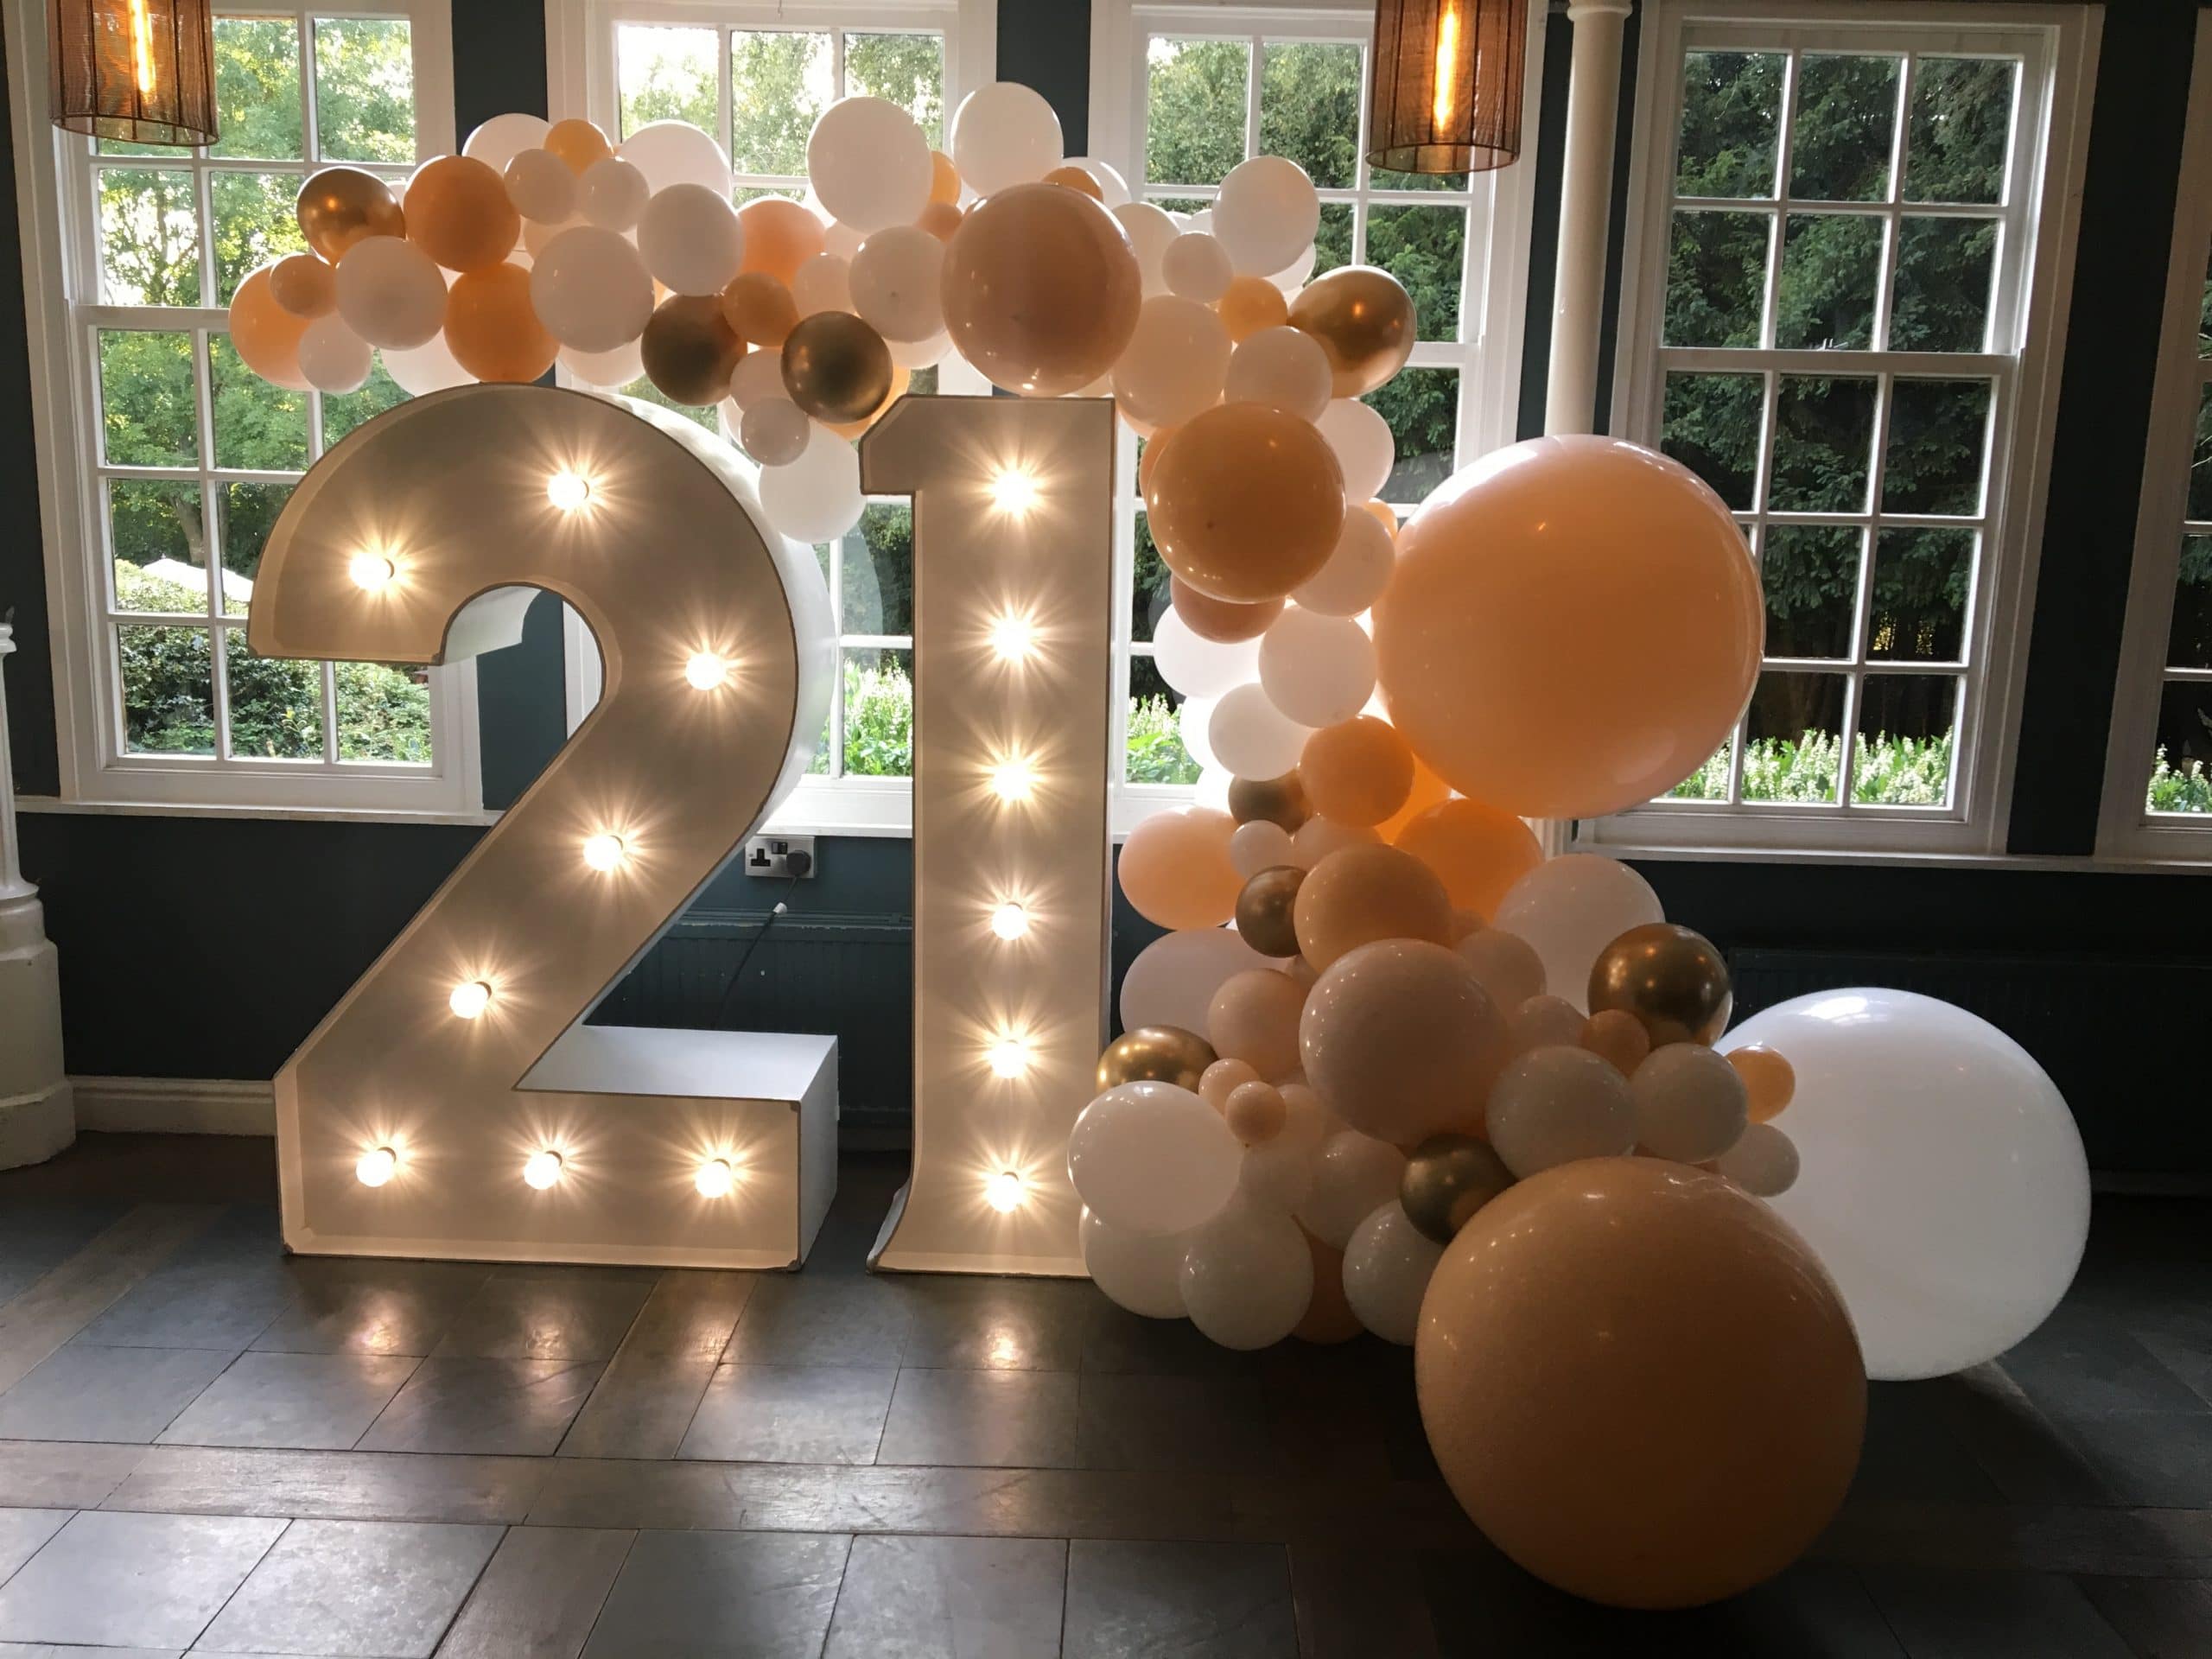 Balloon Arch over 21 Numbers